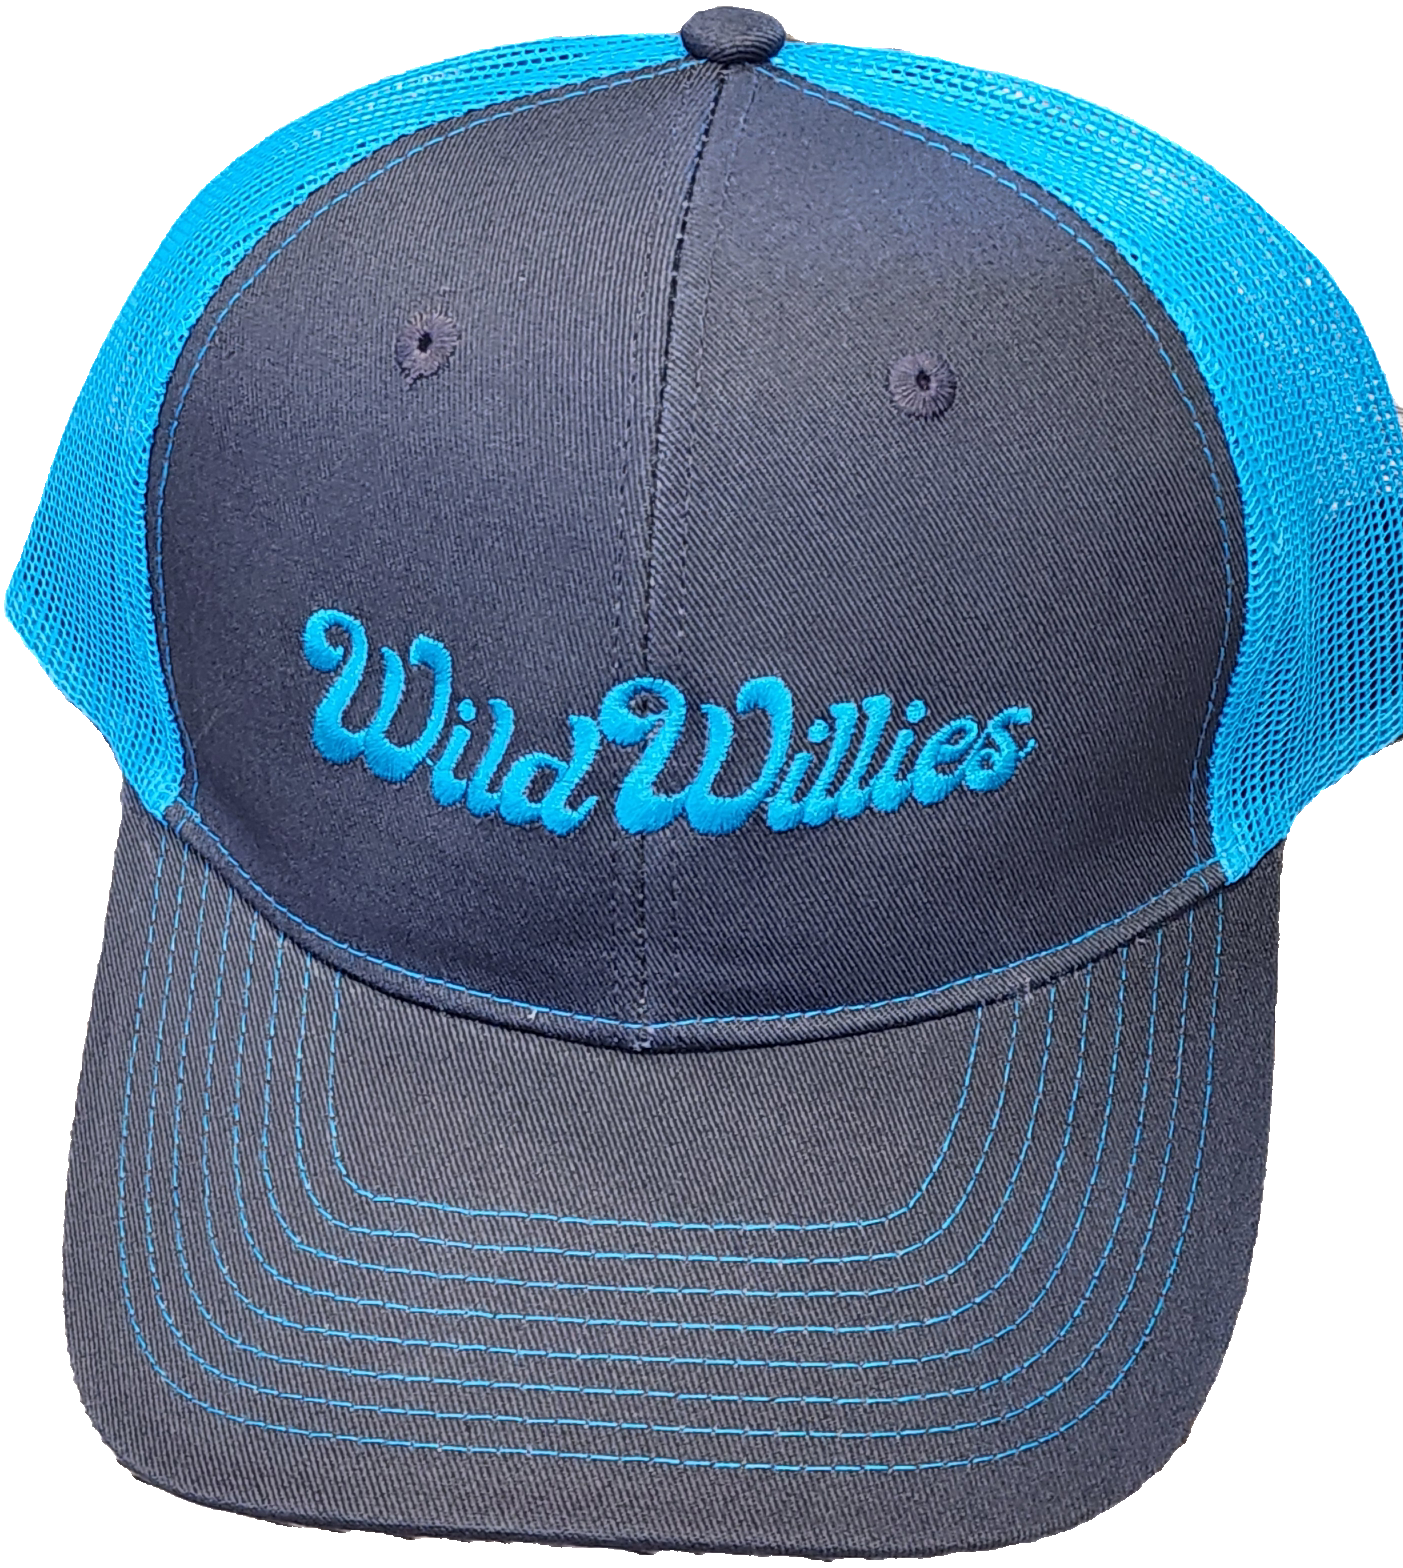 Wild Willies Embroidery Hat